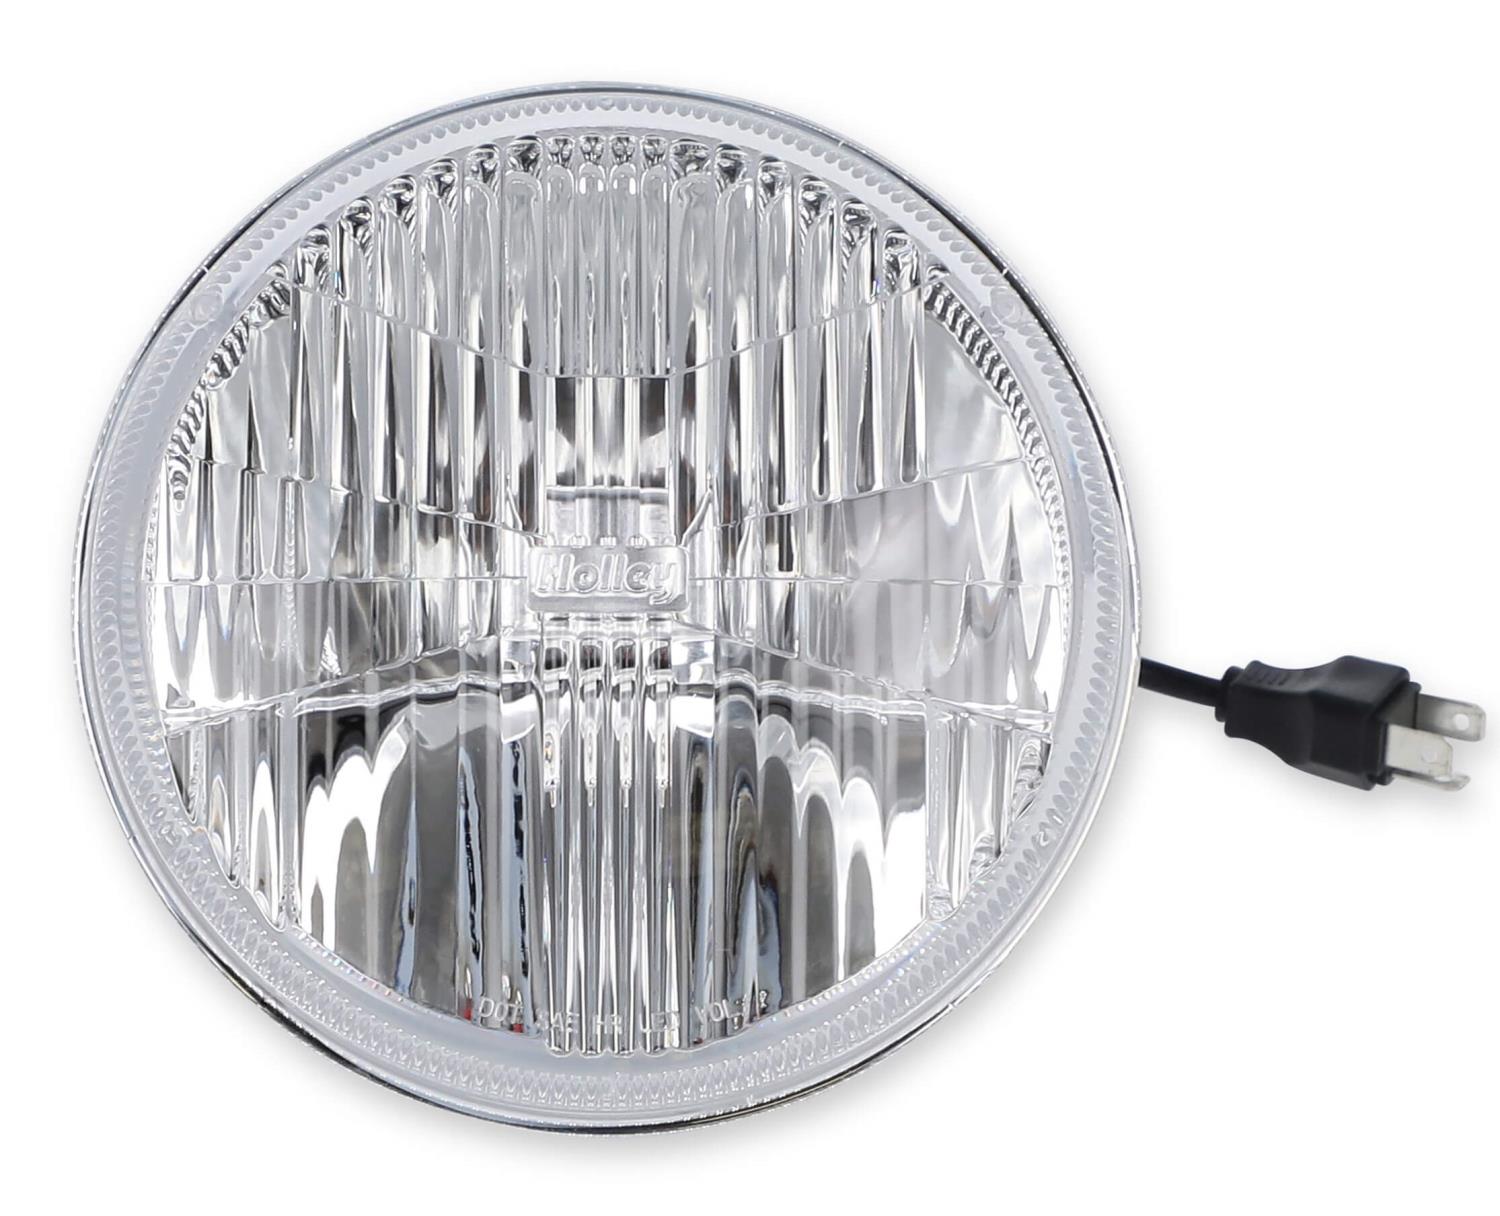 LFRB135 RetroBright LED 7 in. Round Headlight for Select 1930-2006 Vehicles with Round Headlight Grille [Classic White]